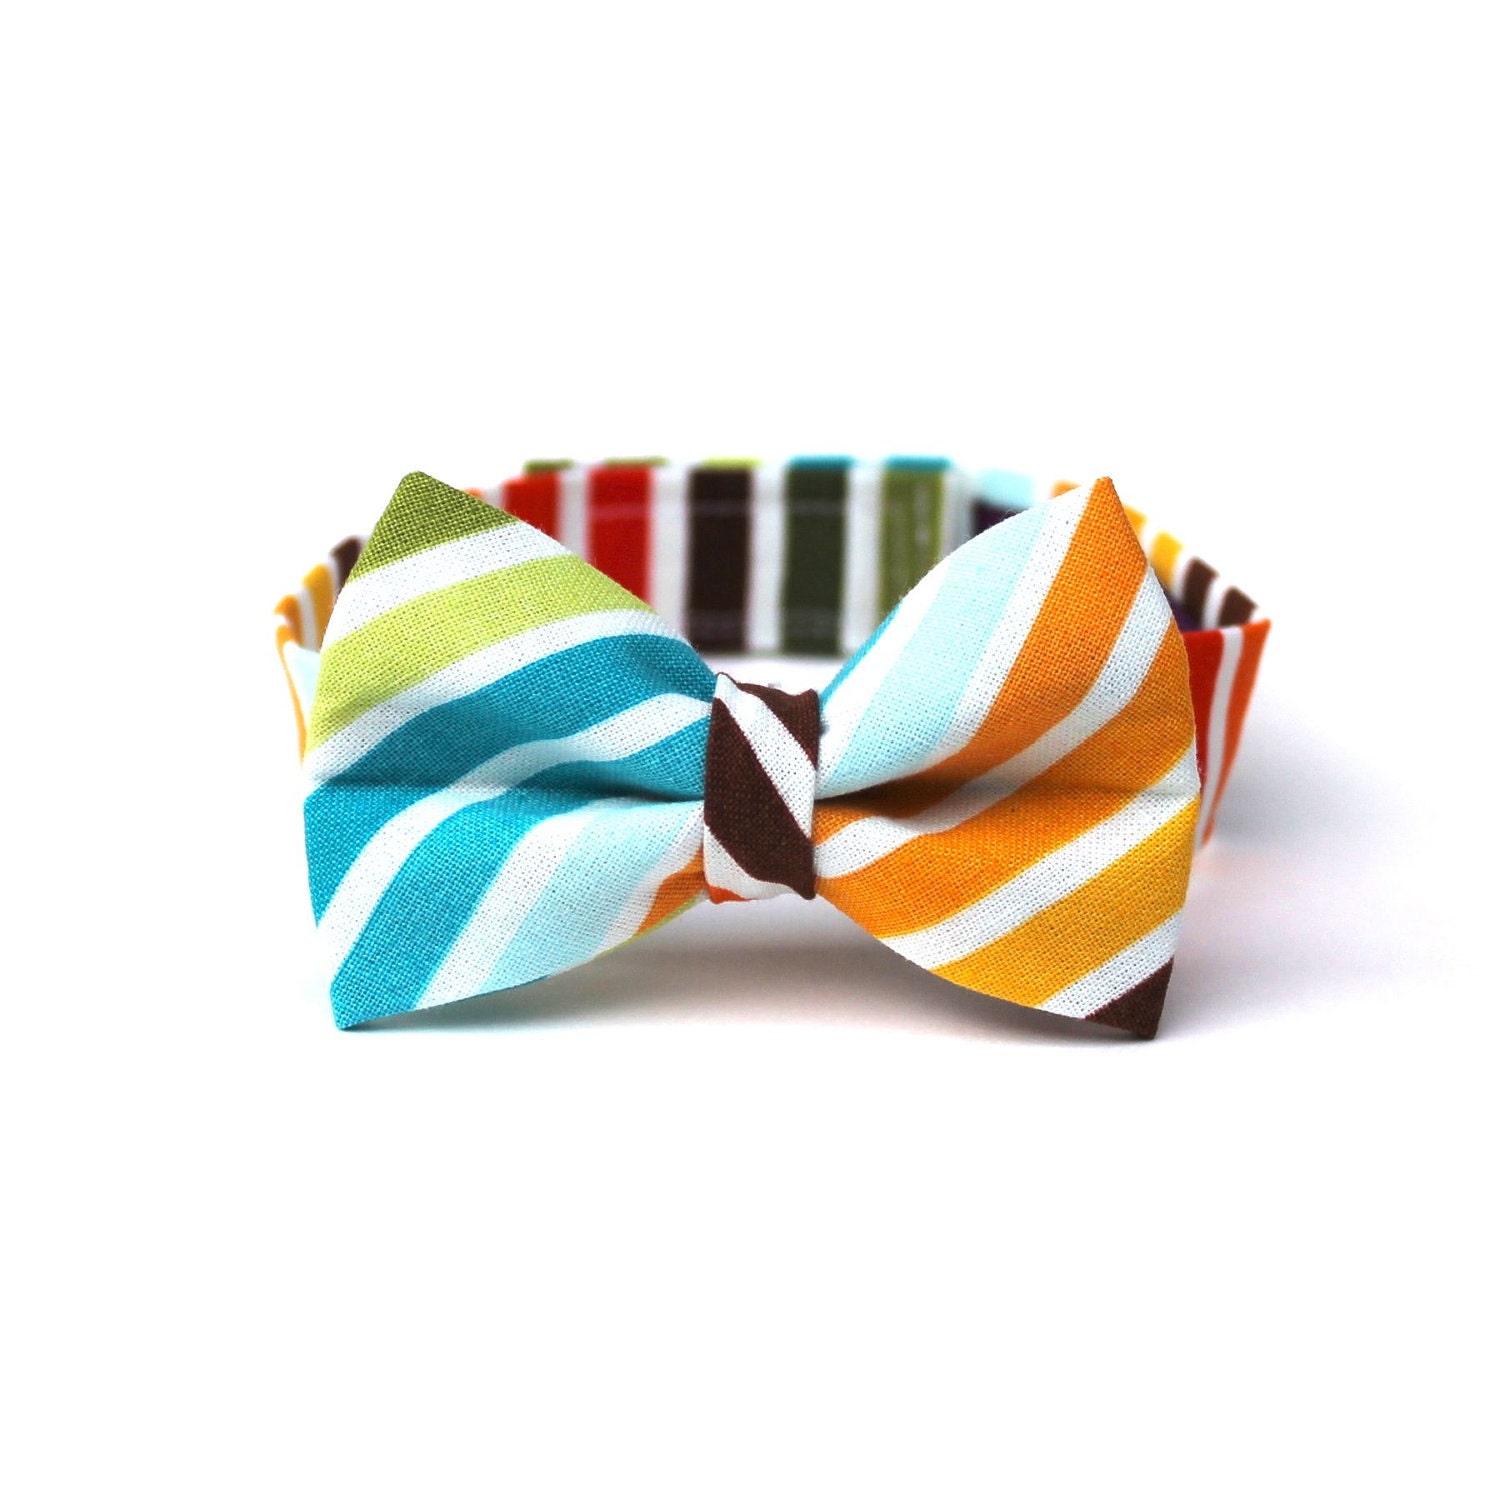 Baby Boy's Bow Tie - Multicolor Stripe - Brown Red Orange Yellow Green Blue White